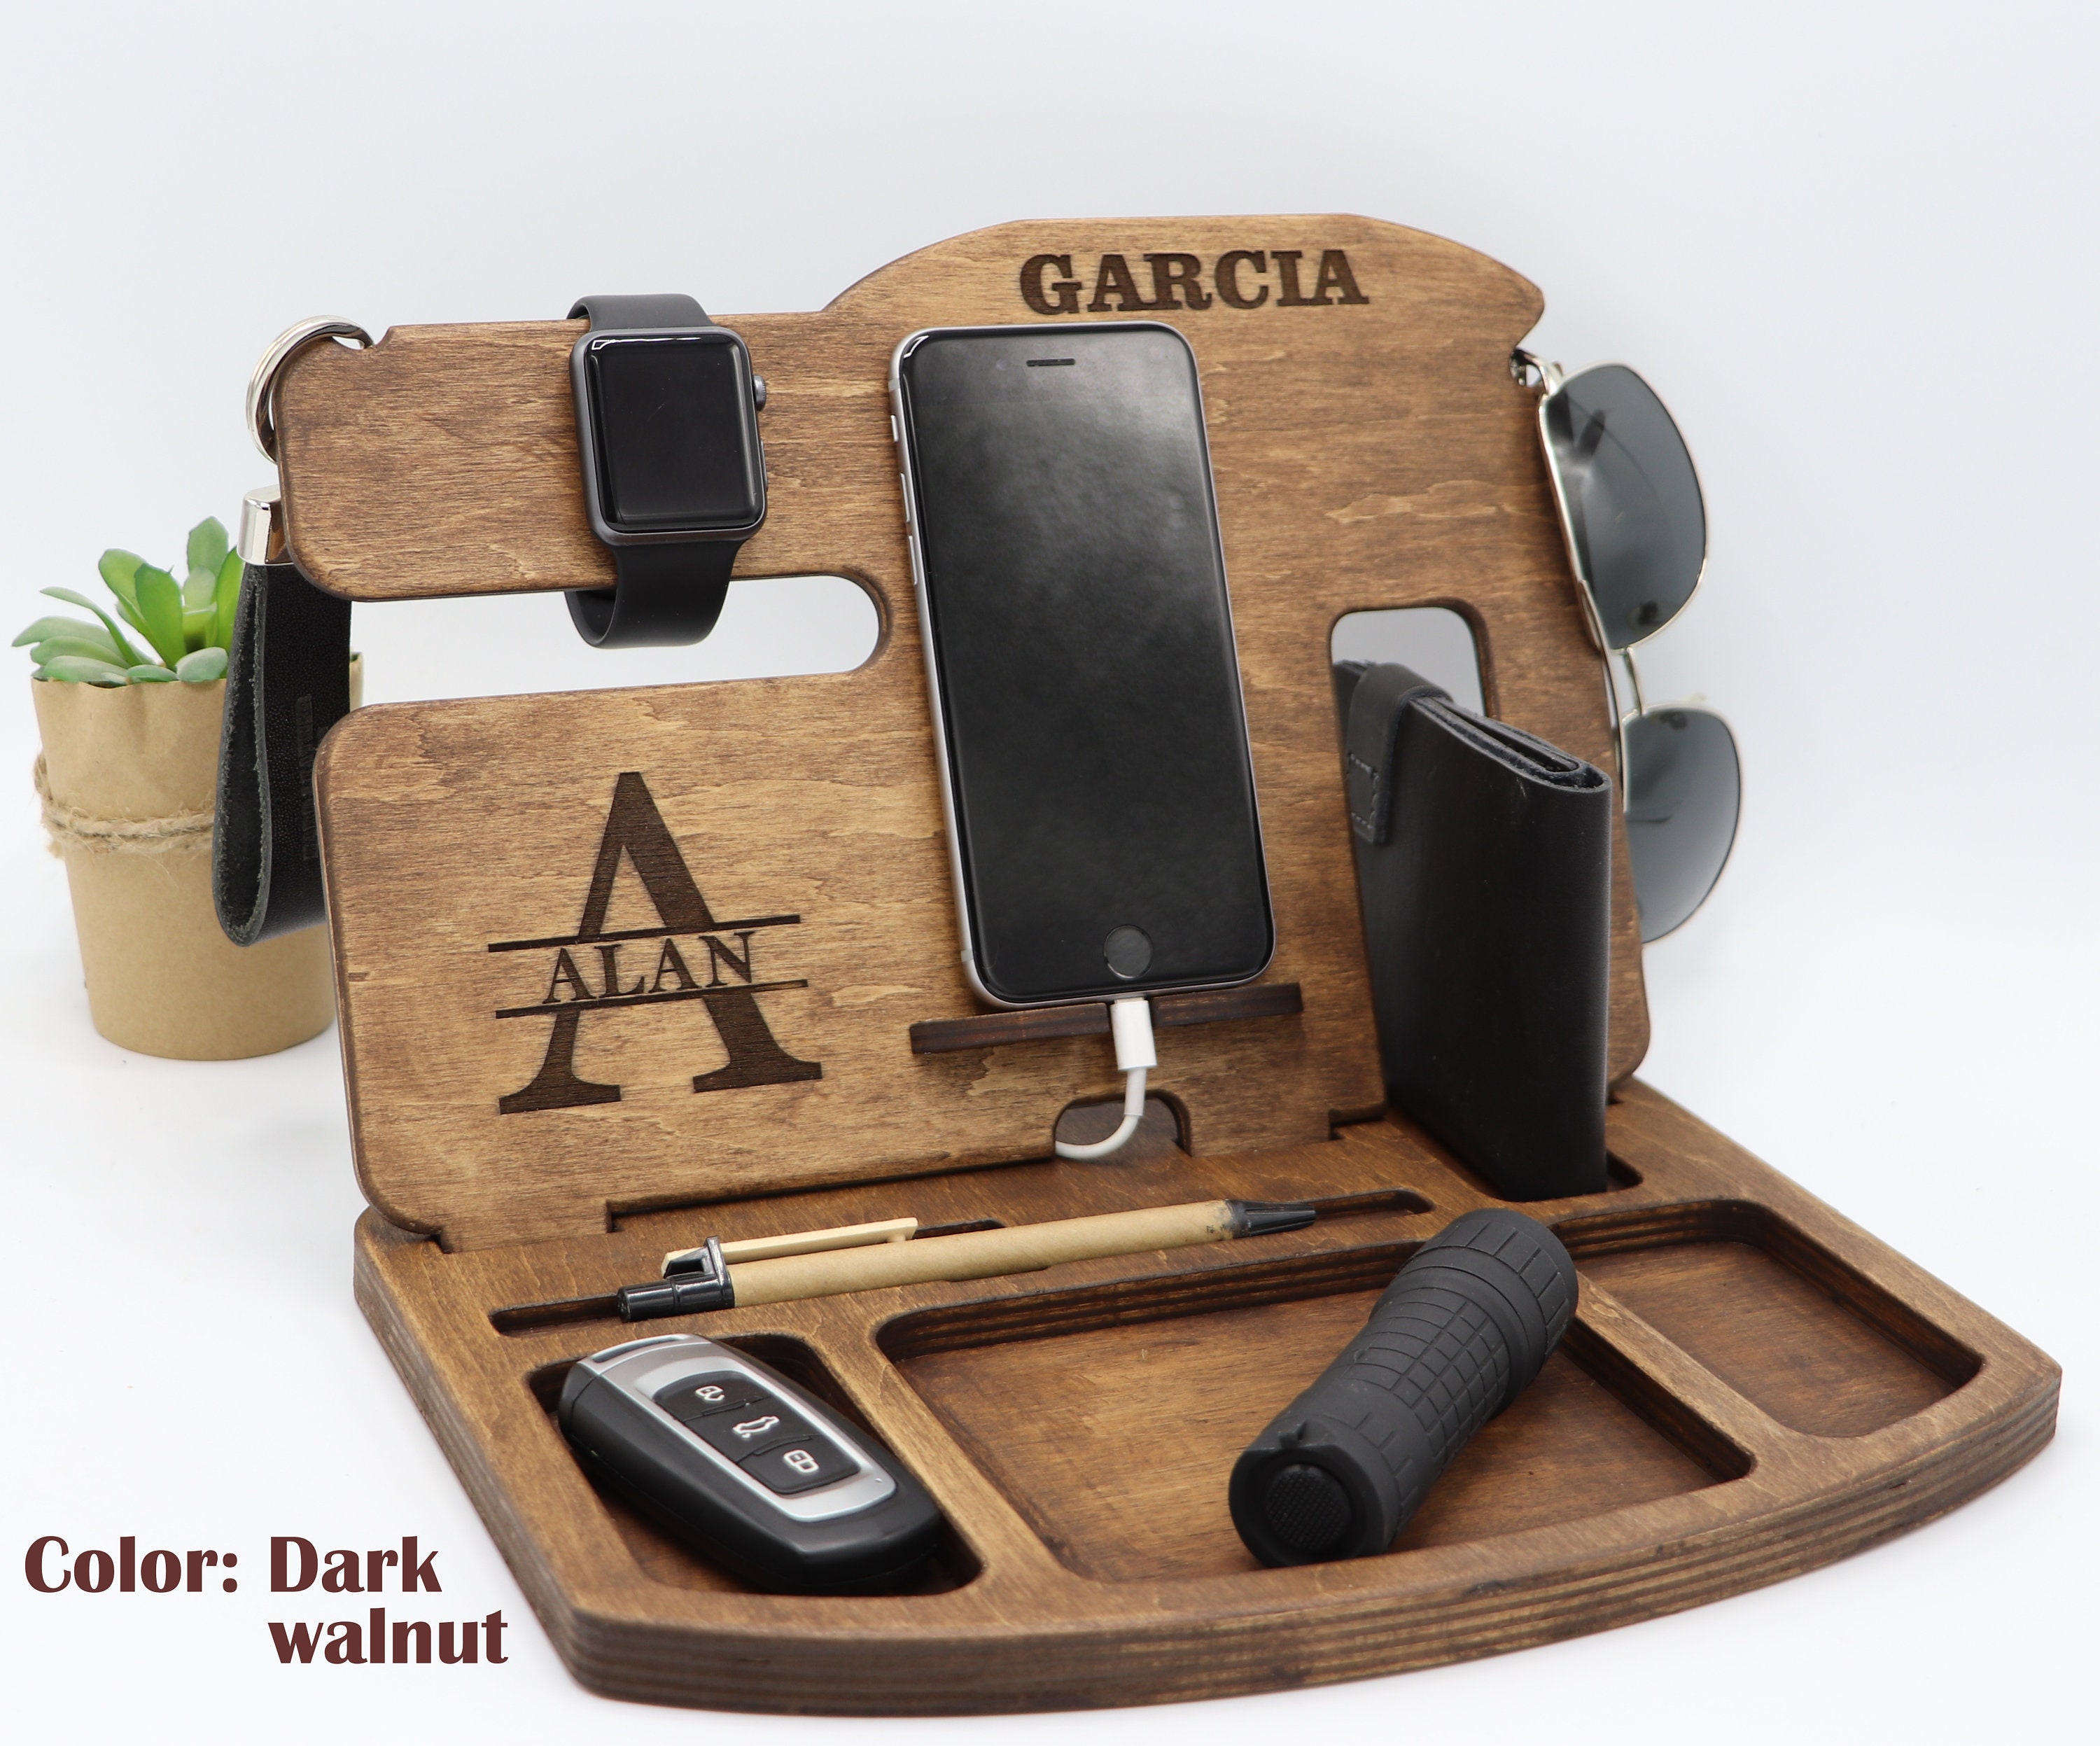 Wooden Docking Station docking station gift for men gifts for him desk organizer personalized gifts birthday gifts Gifts for father 